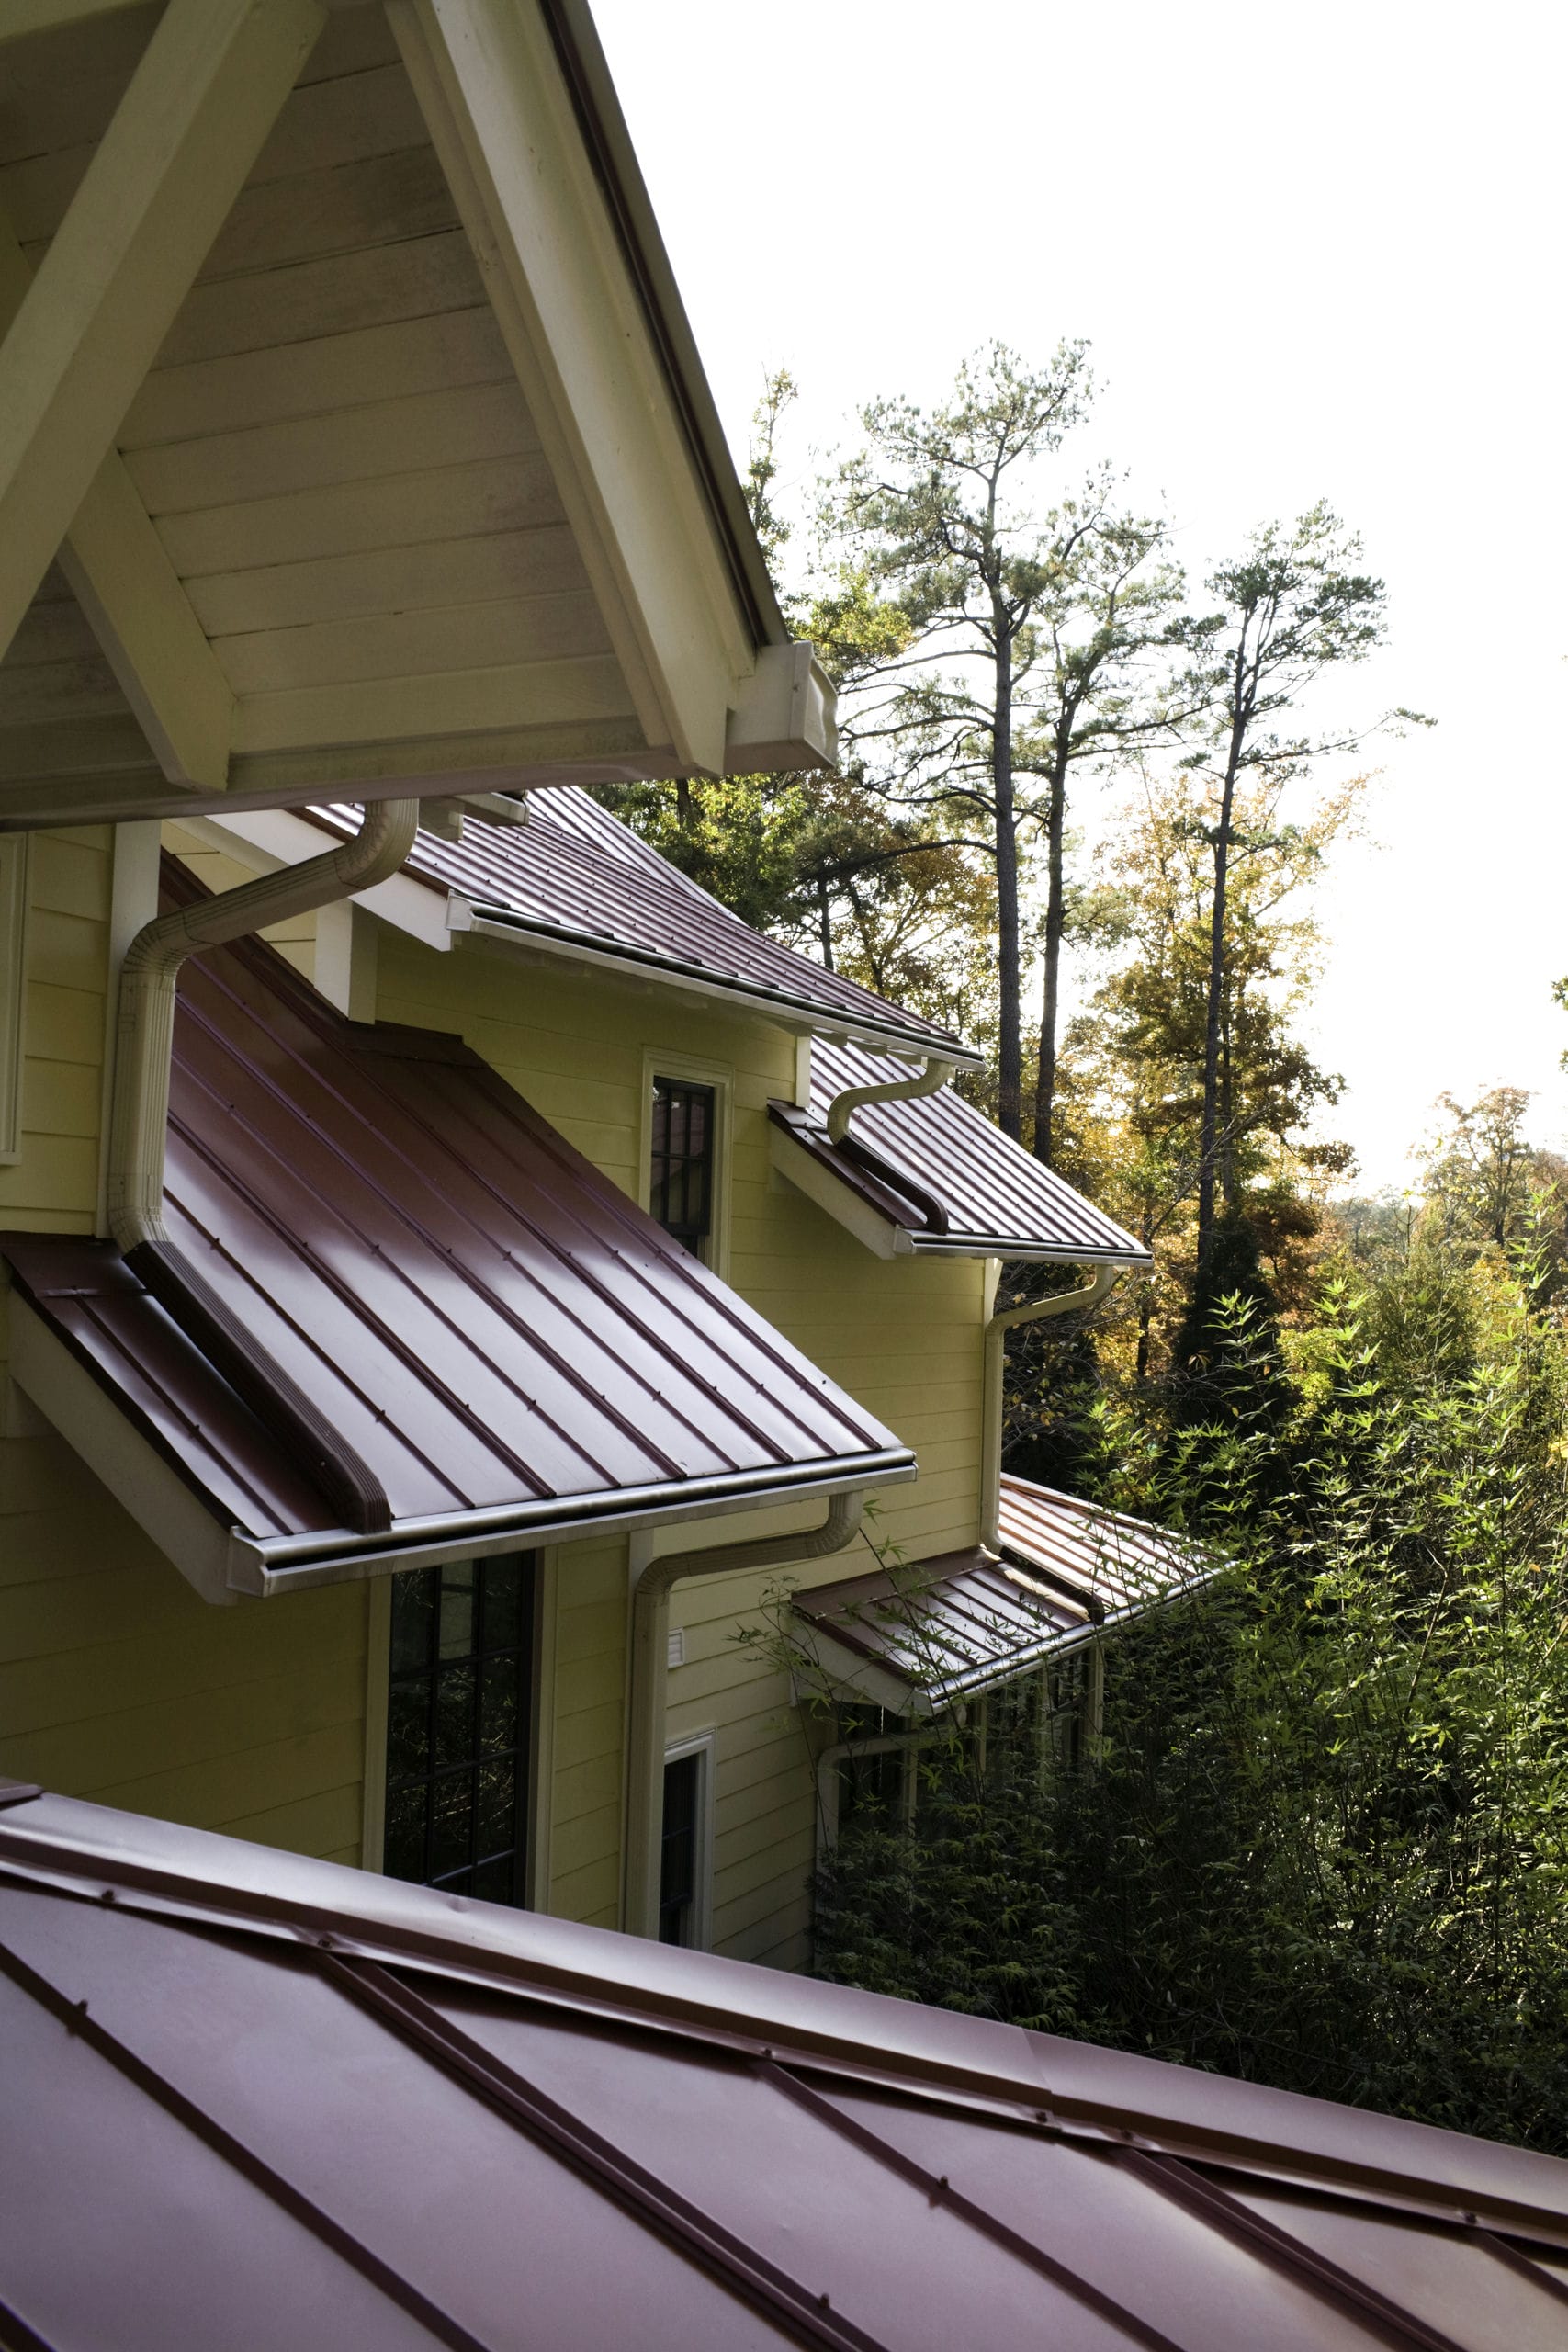 A detail view of red standing-seam metal roof forms appearing to cascade down the wooded landscape